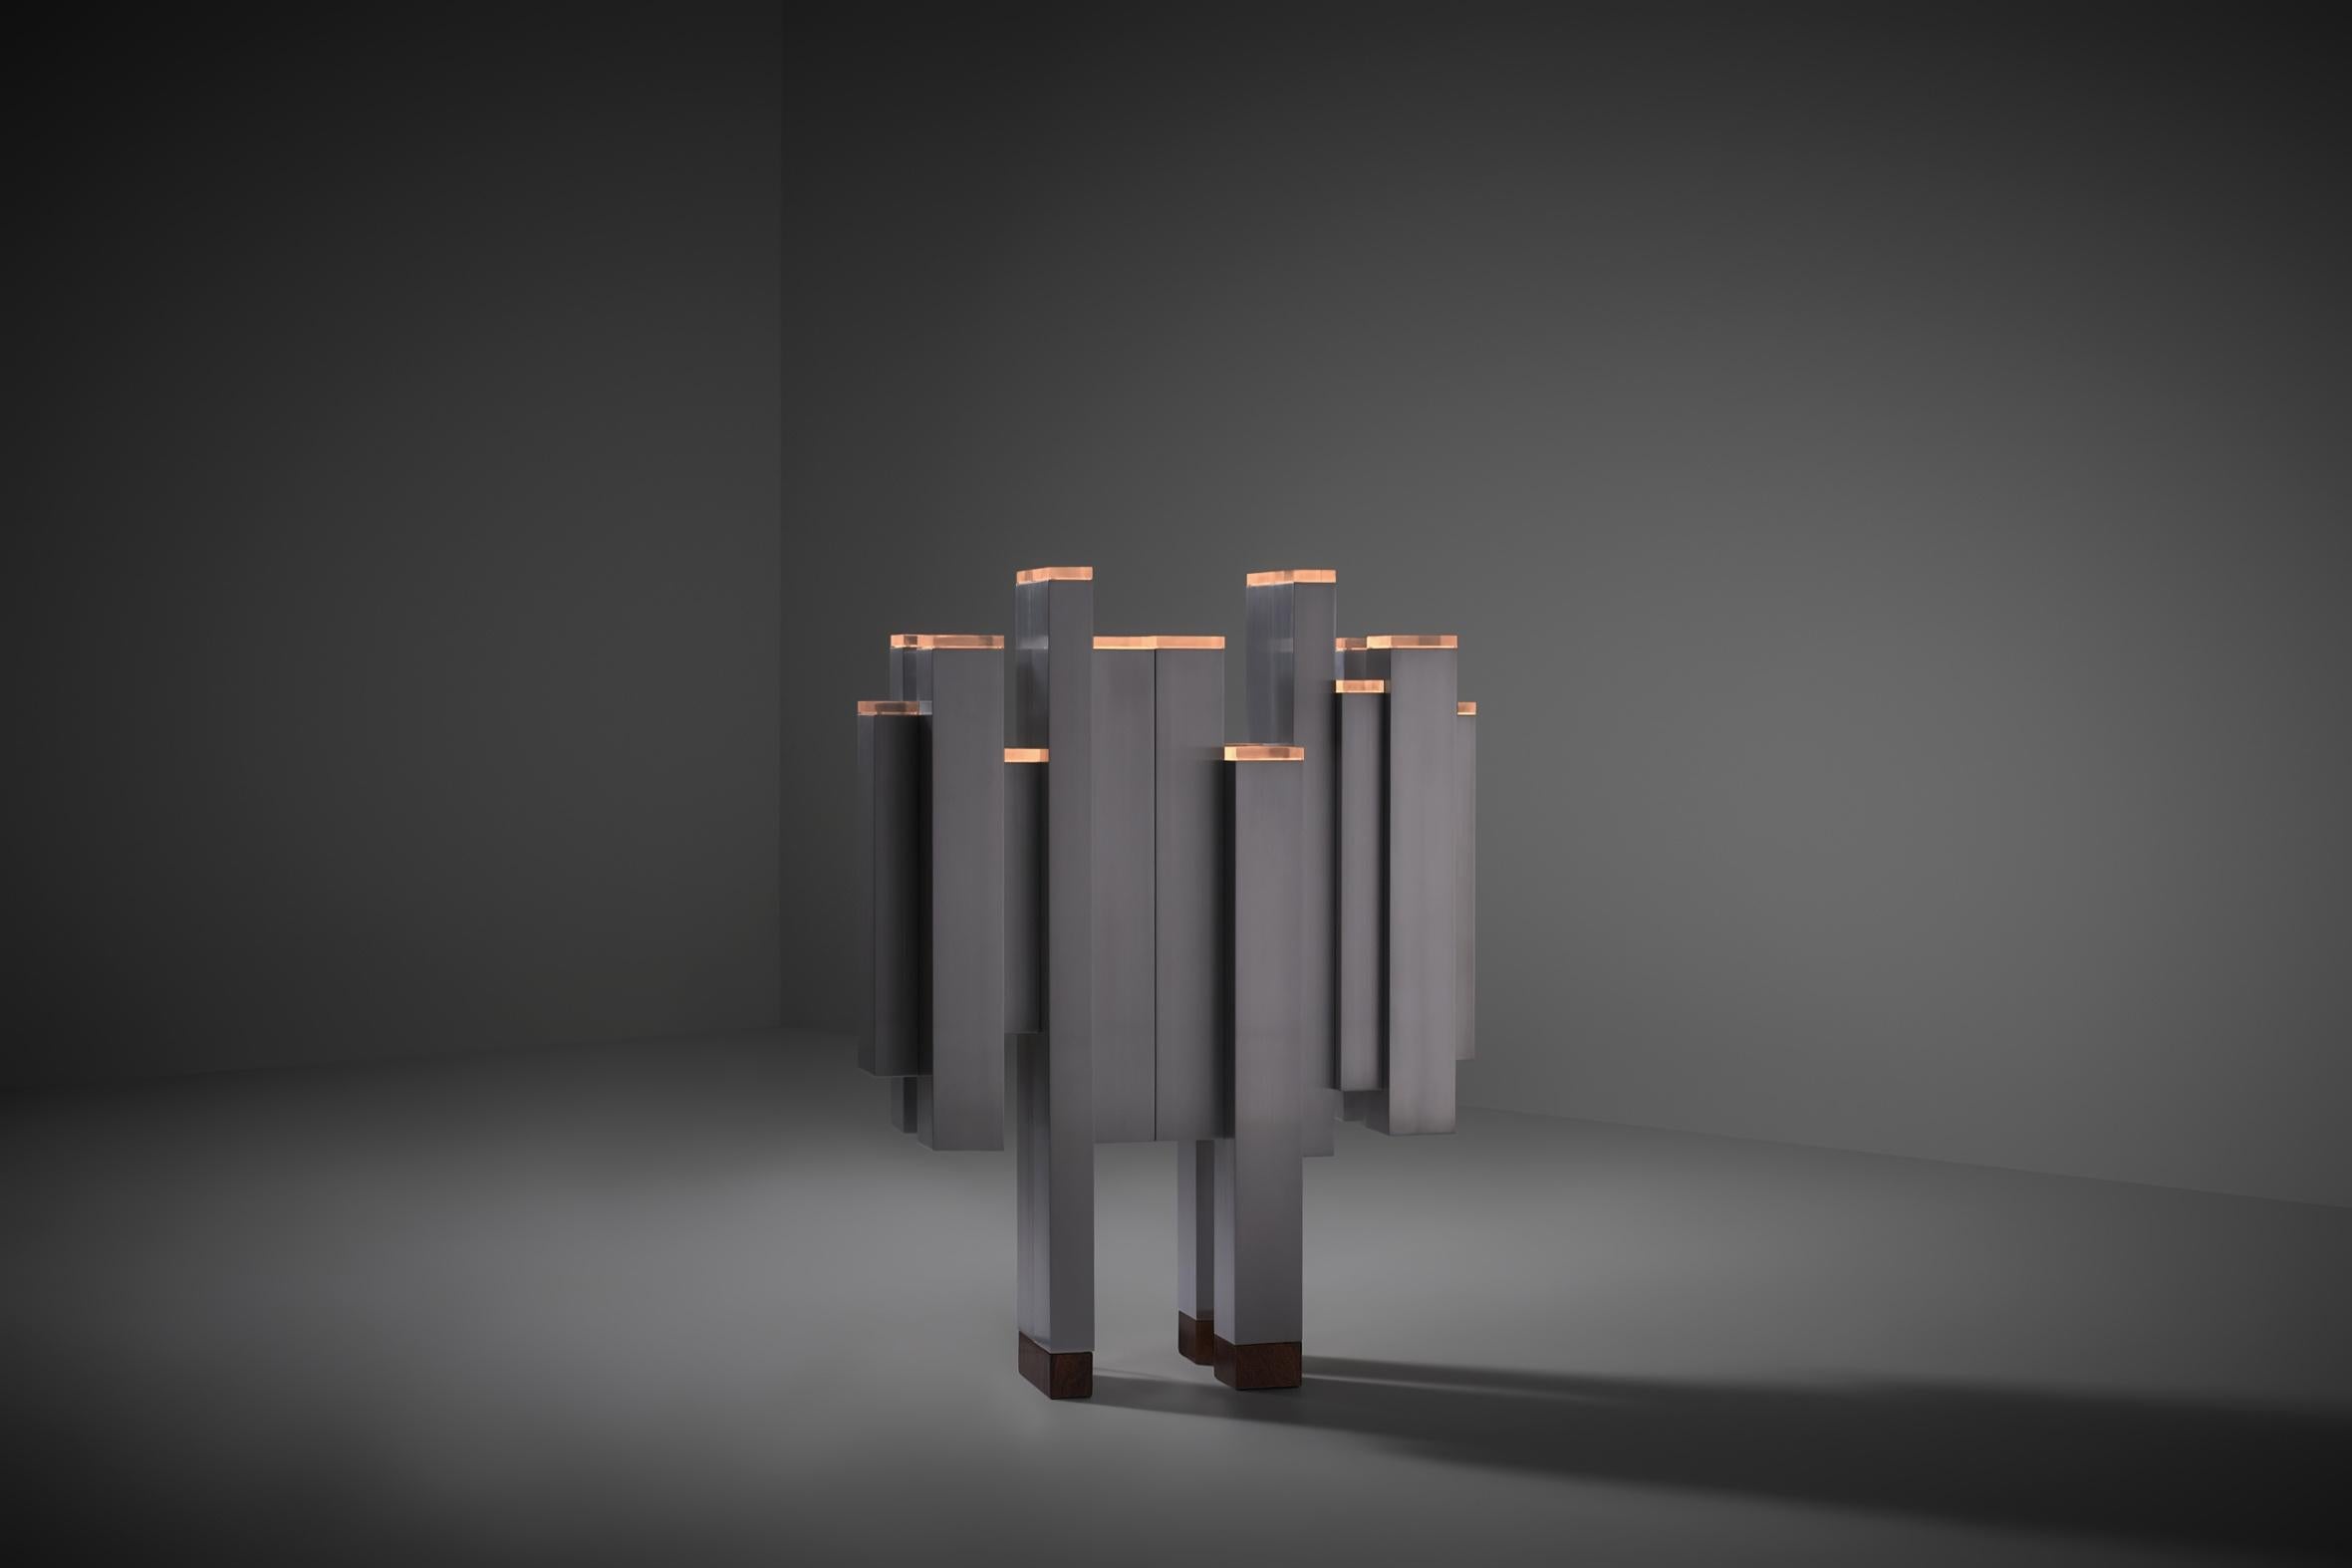 Rare sculptural floor lamp model 'Scultura' by Gaetano Missaglia, Italy in 1960s. Unique design composed out of a variety of twenty square and rectangular tubes with matching plexiglass diffusers and Walnut block bases resulting in a futuristic